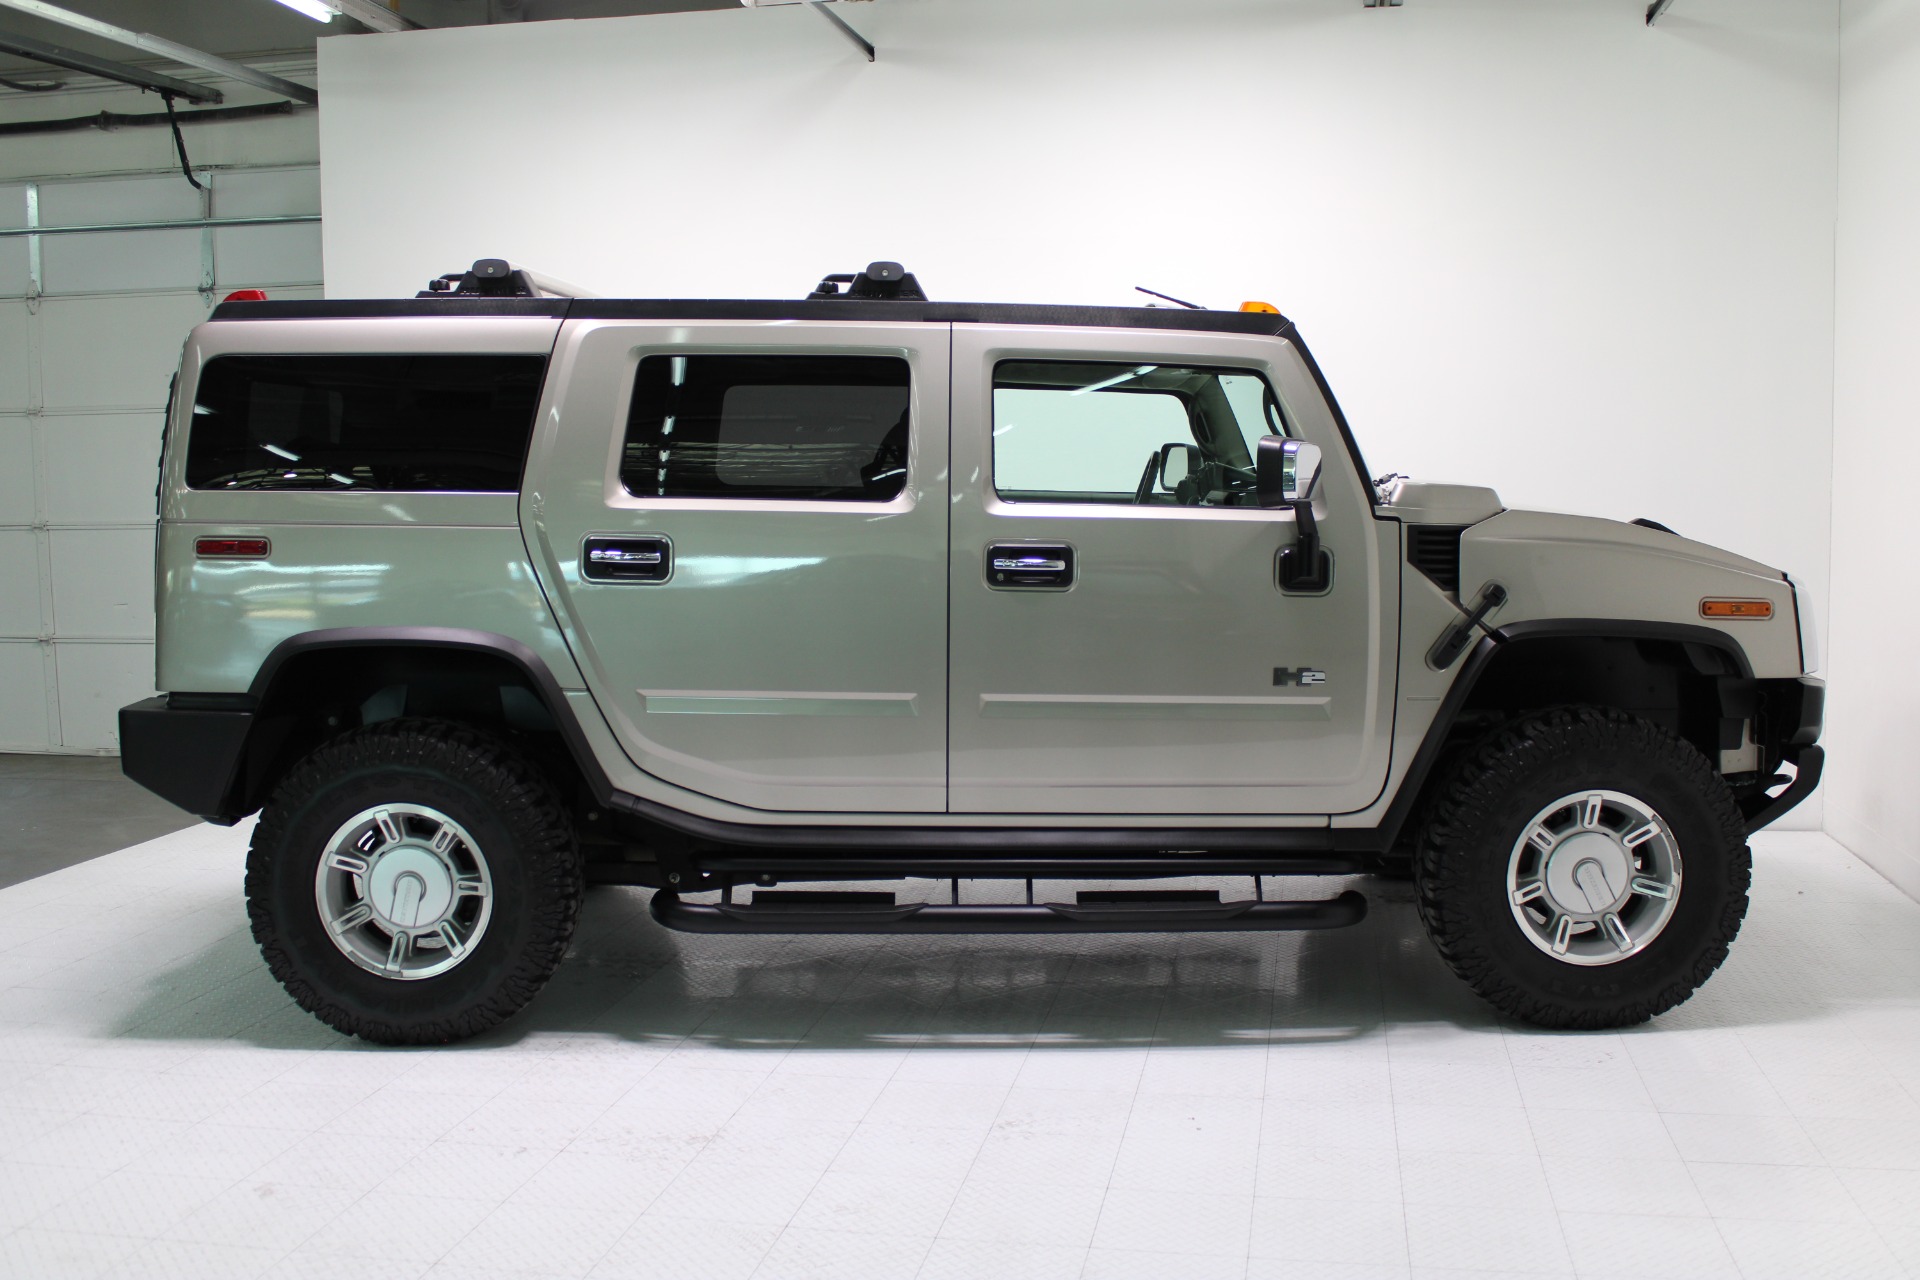 Used-2003-HUMMER-H2-SUV-Mercedes-Benz